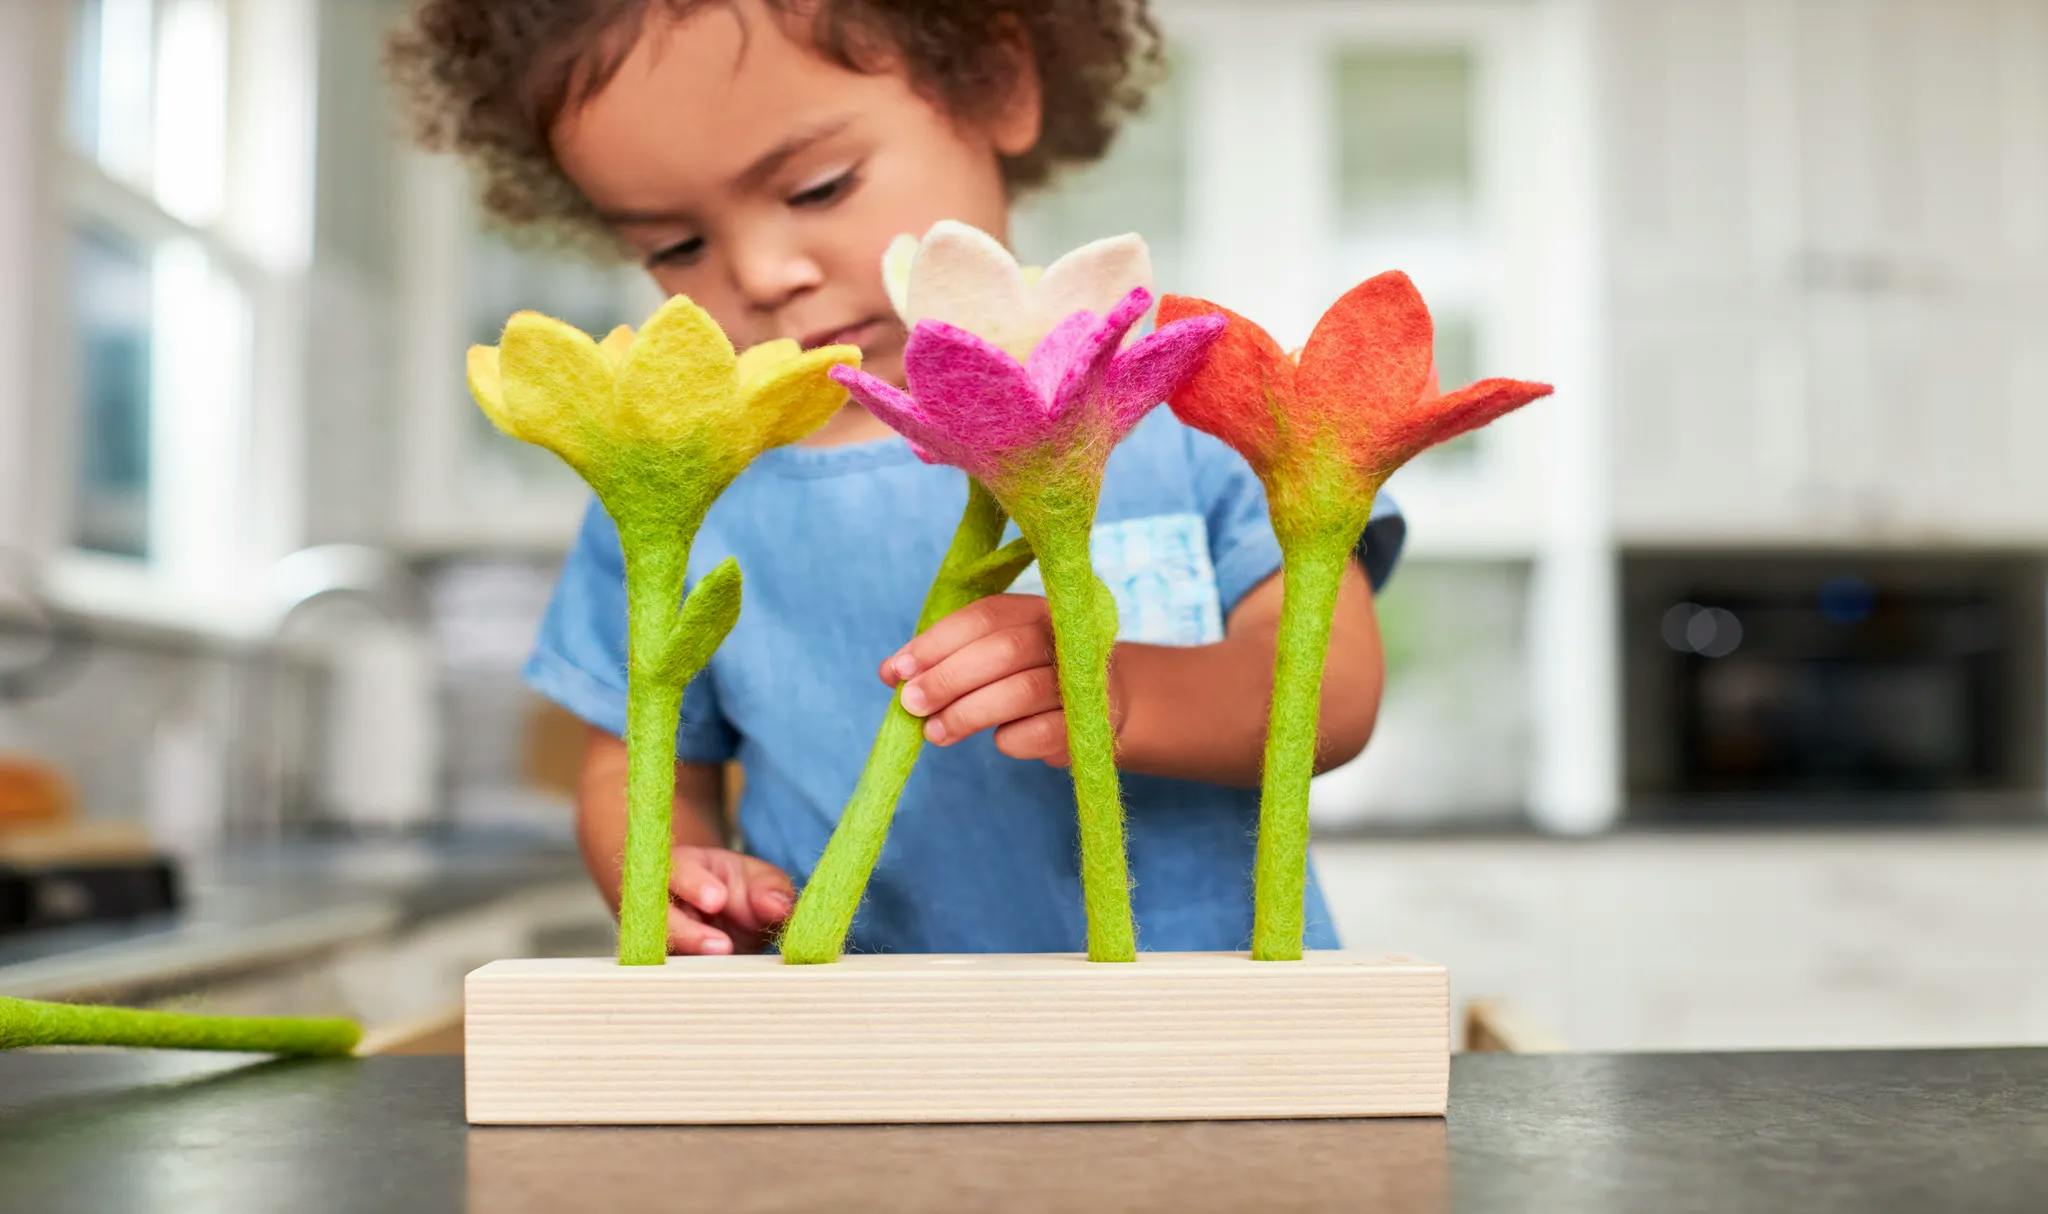 two year old playing with the felt flowers